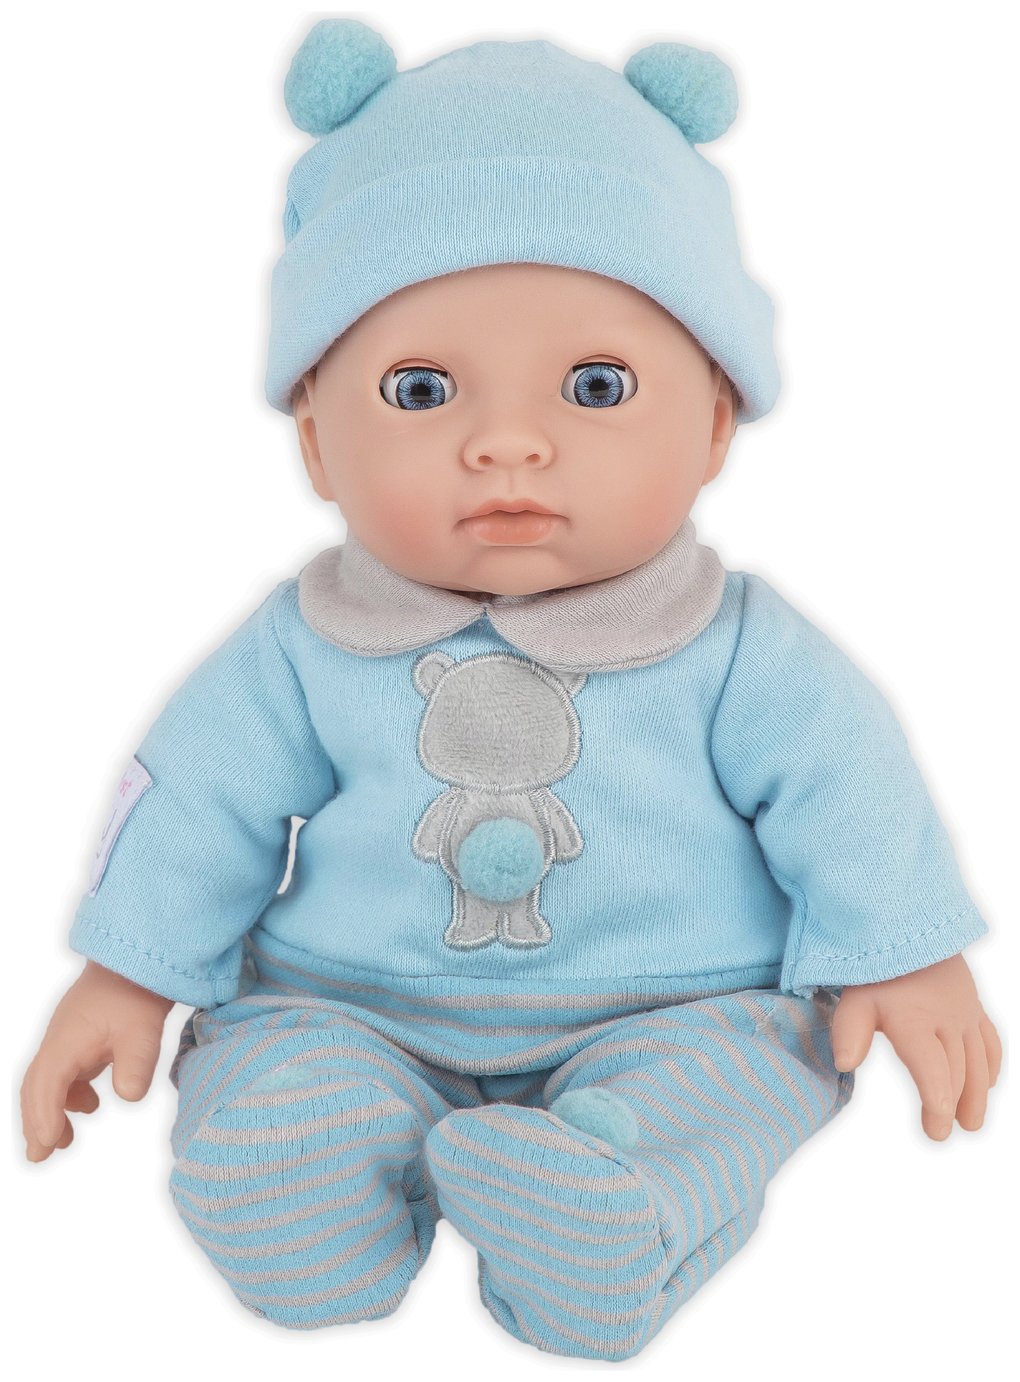 Chad Valley Tiny Treasures My First Baby with Blue Outfit